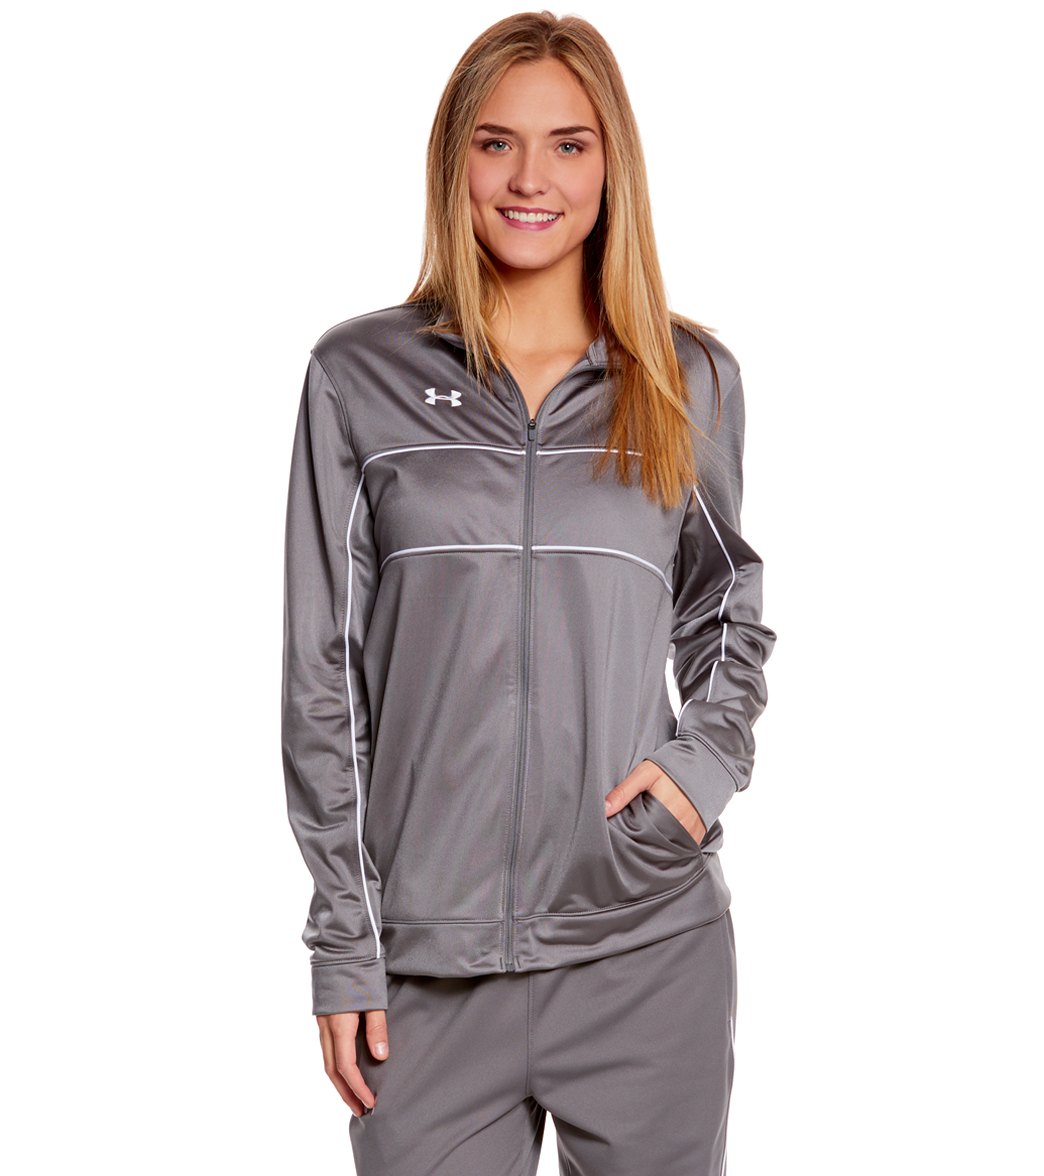 Under Armour Women's Rival Knit Warm-Up Jacket - Graphite/Black Large Polyester - Swimoutlet.com